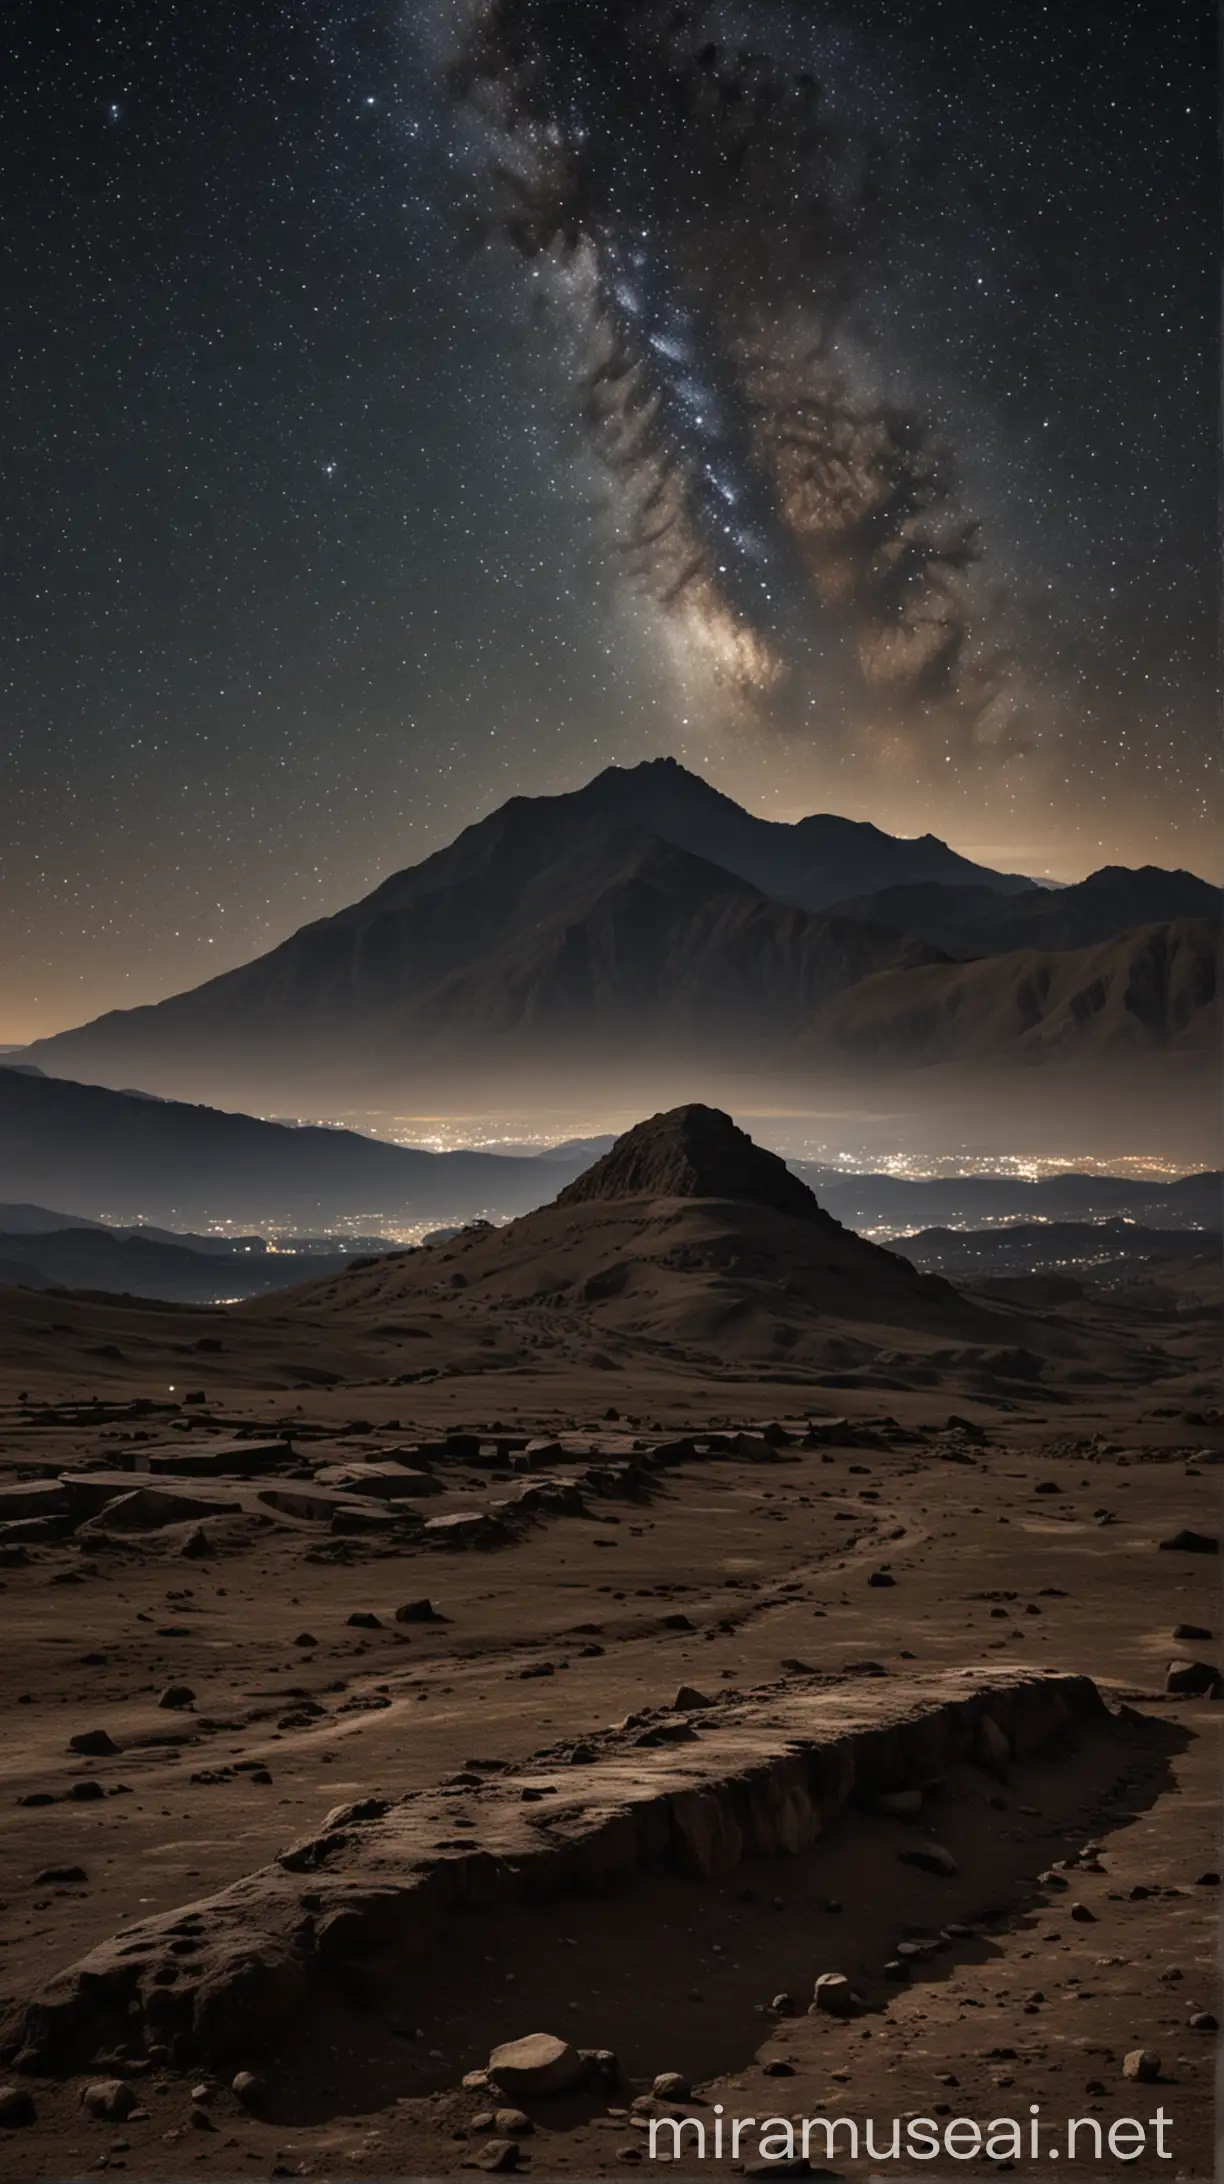 Mysterious Tomb Night Sky with Mountain Silhouette